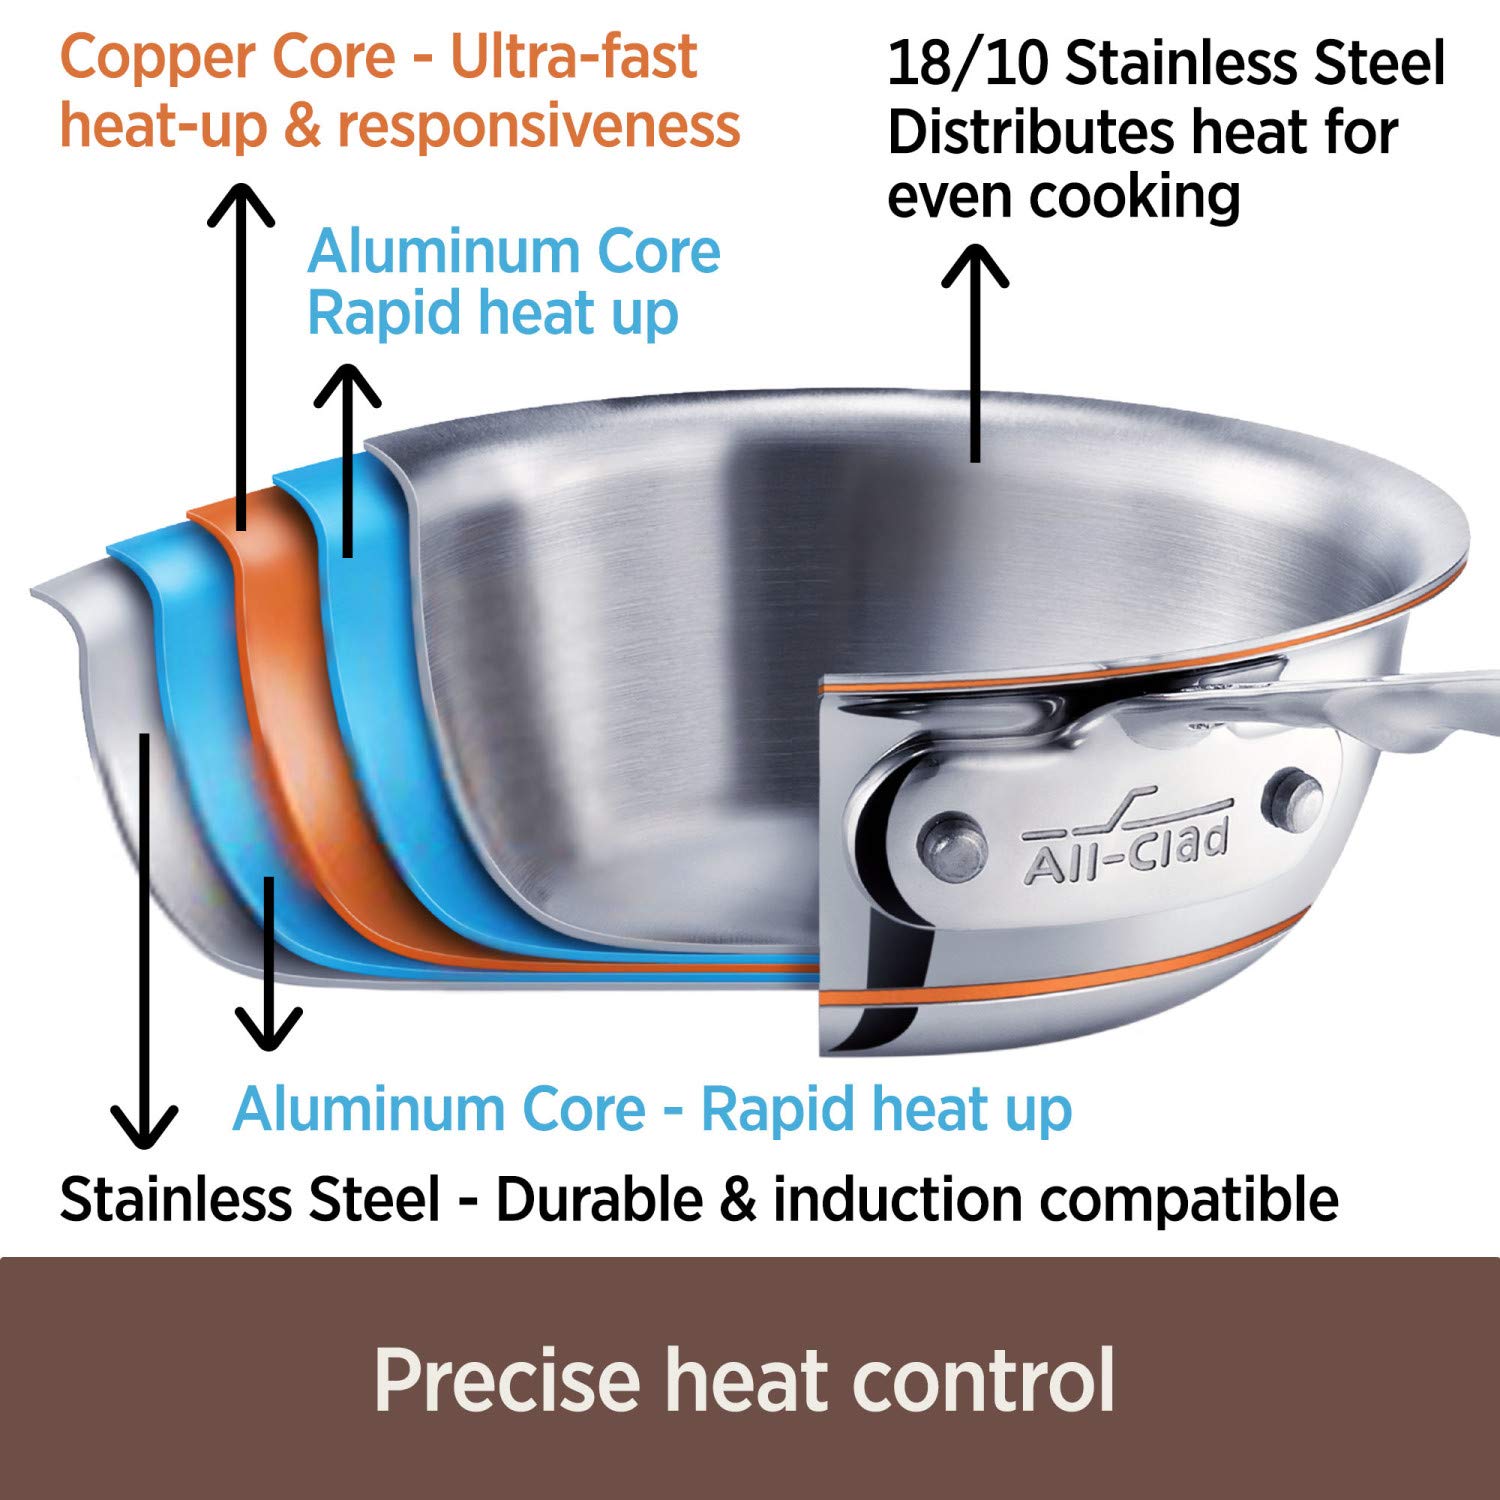 All-Clad 6202 SS Copper Core 5-Ply Bonded Dishwasher Safe Saucepan / Cookware, 2-Quart, Silver,8700800027